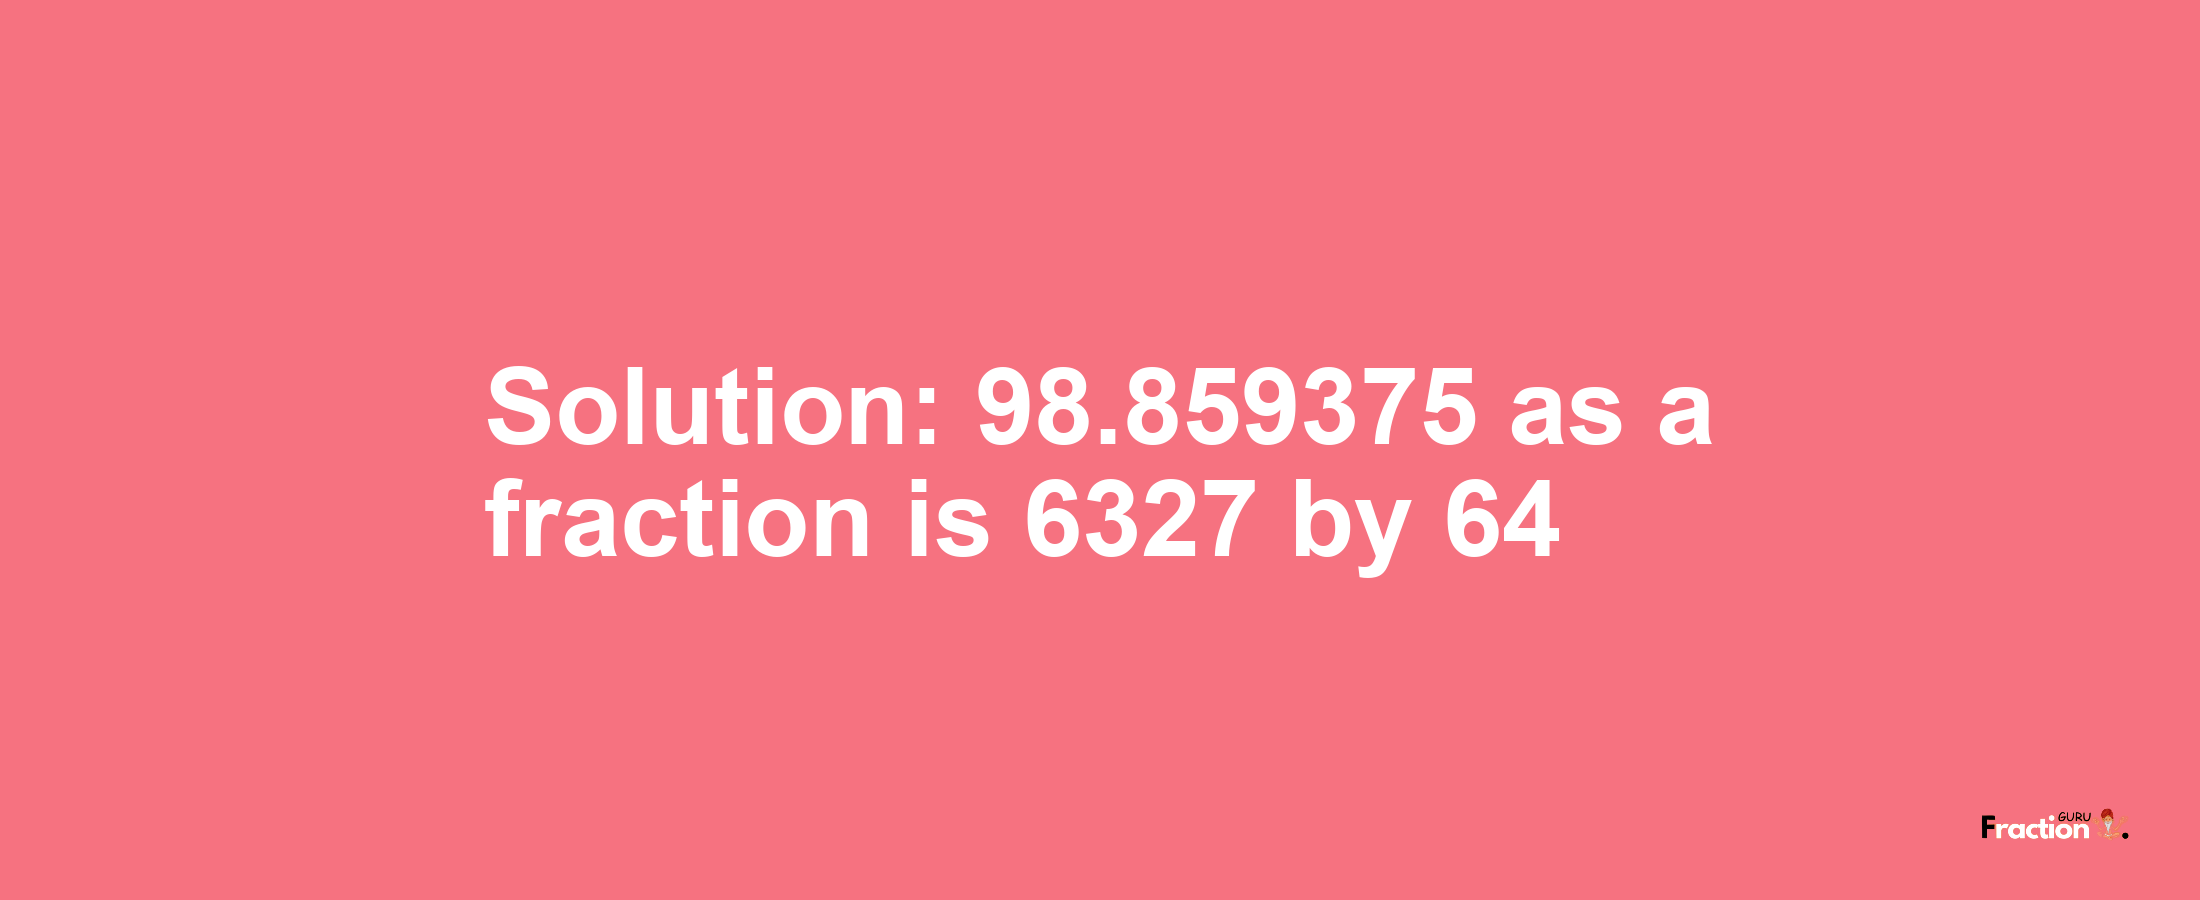 Solution:98.859375 as a fraction is 6327/64